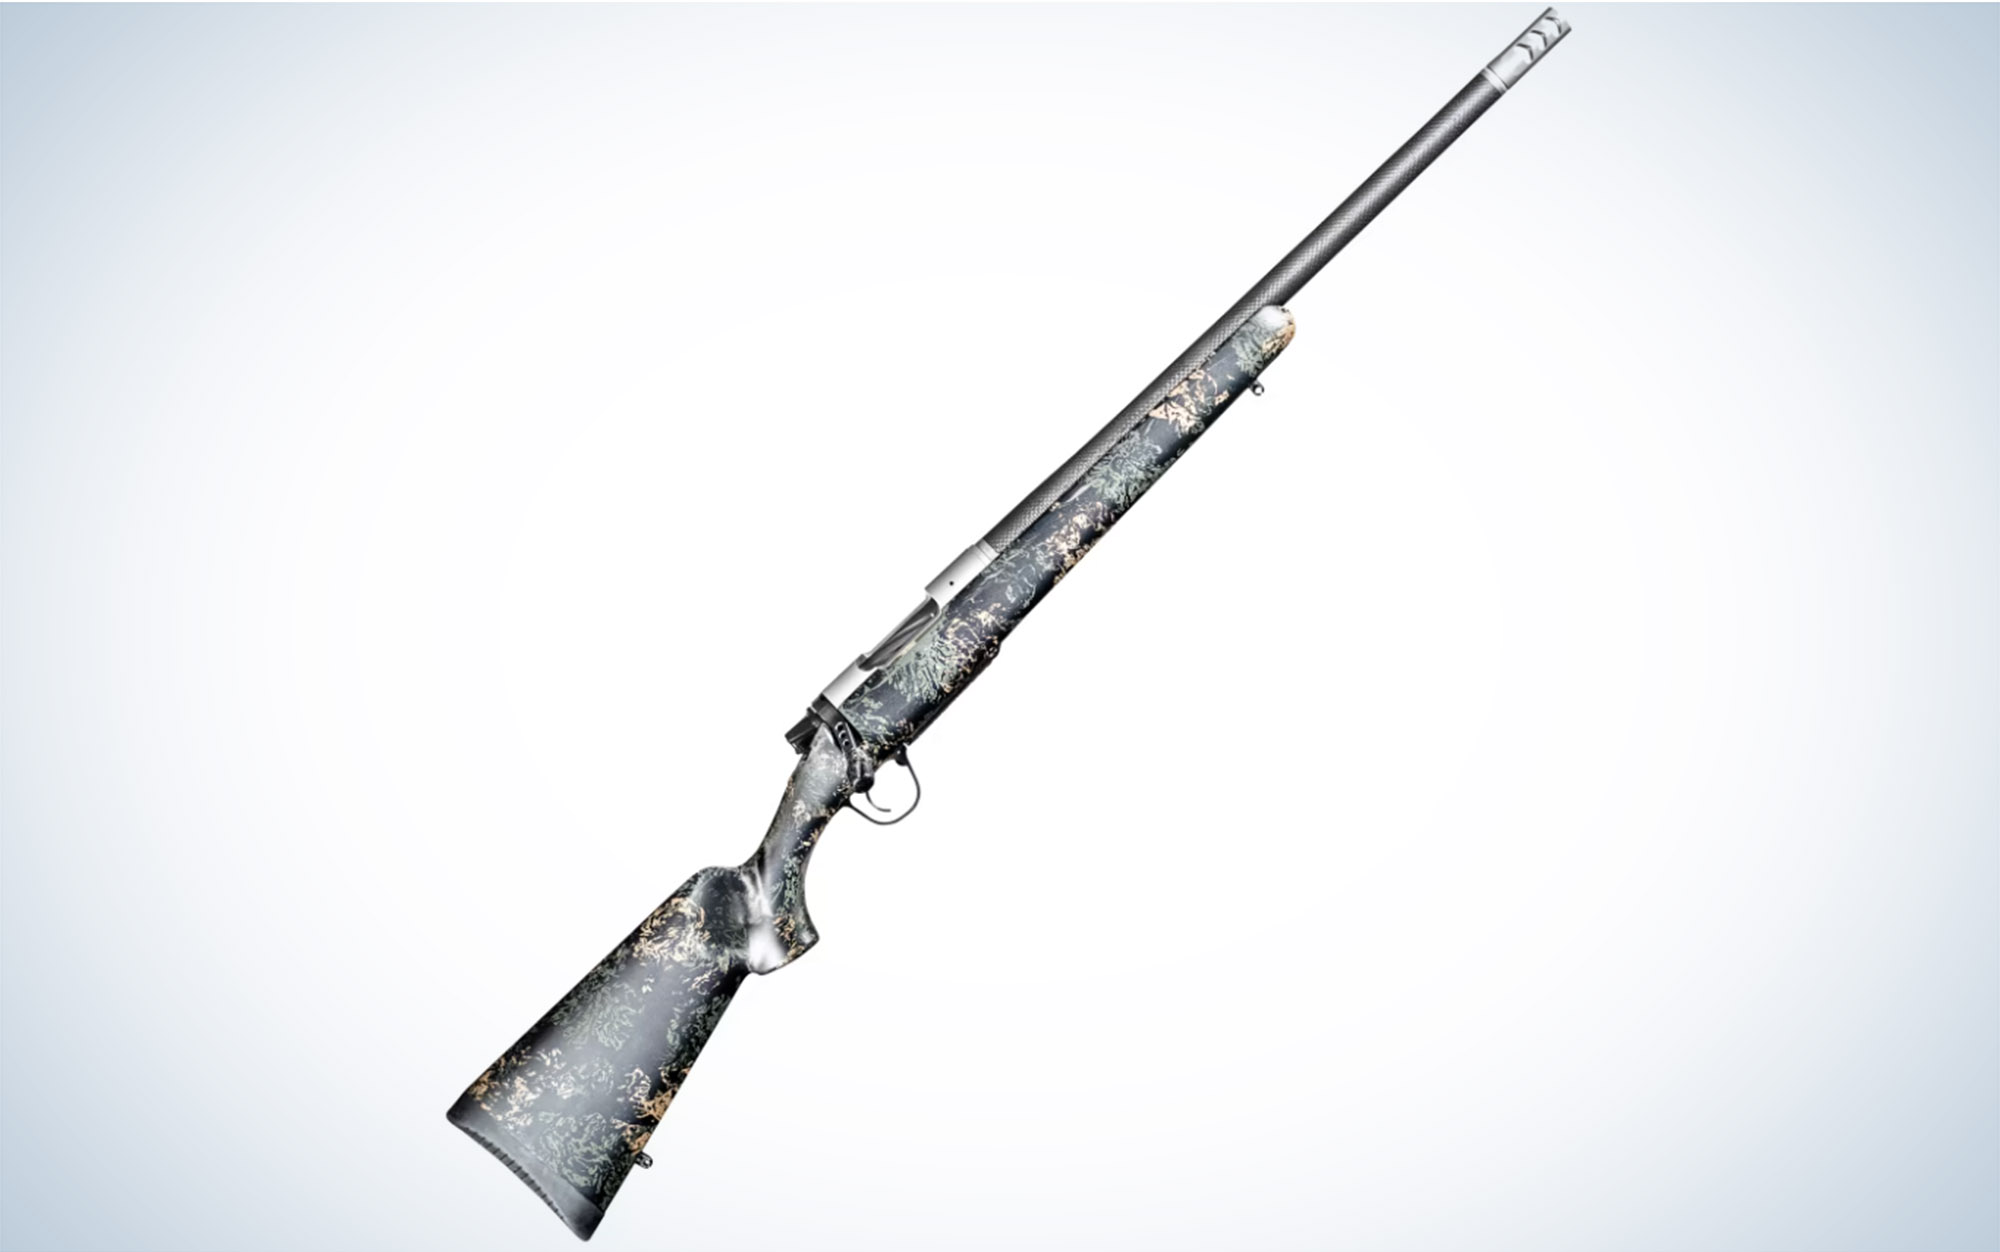 The Christensen Ridgeline FFT is one of the best guns for hog hunting.